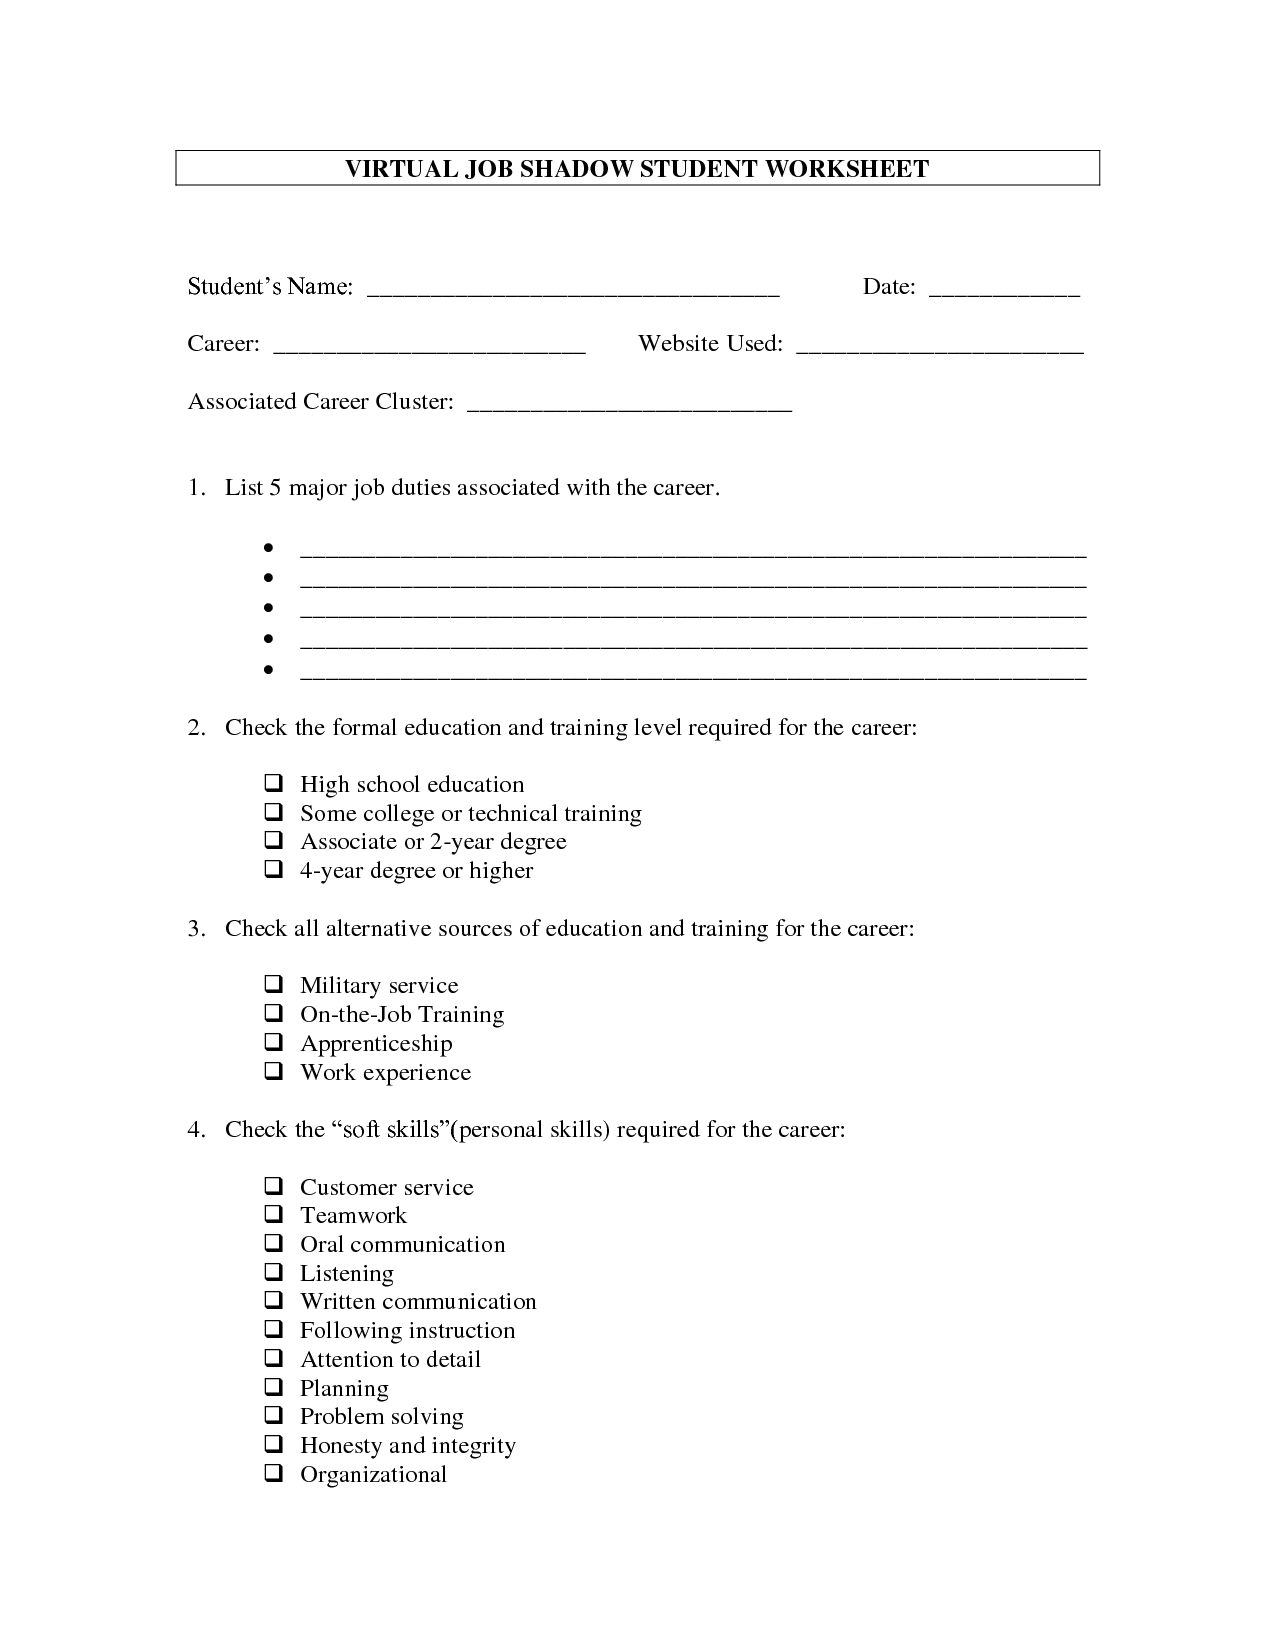 15-best-images-of-printable-worksheets-for-high-school-students-high